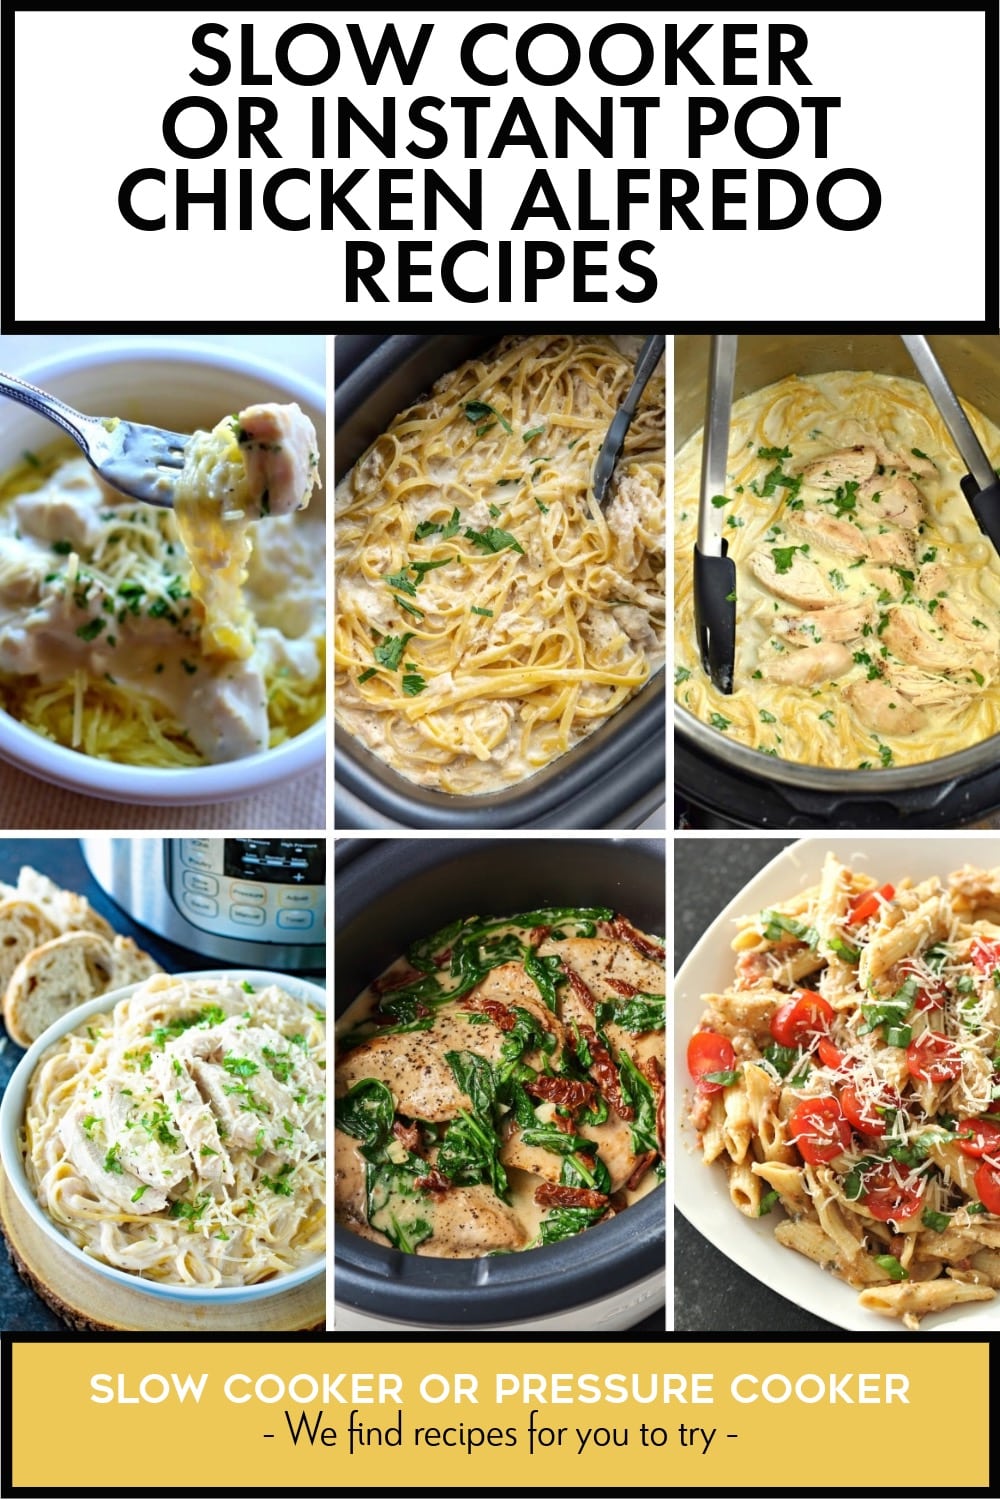 Pinterest image of Slow Cooker or Instant Pot Chicken Alfredo Recipes